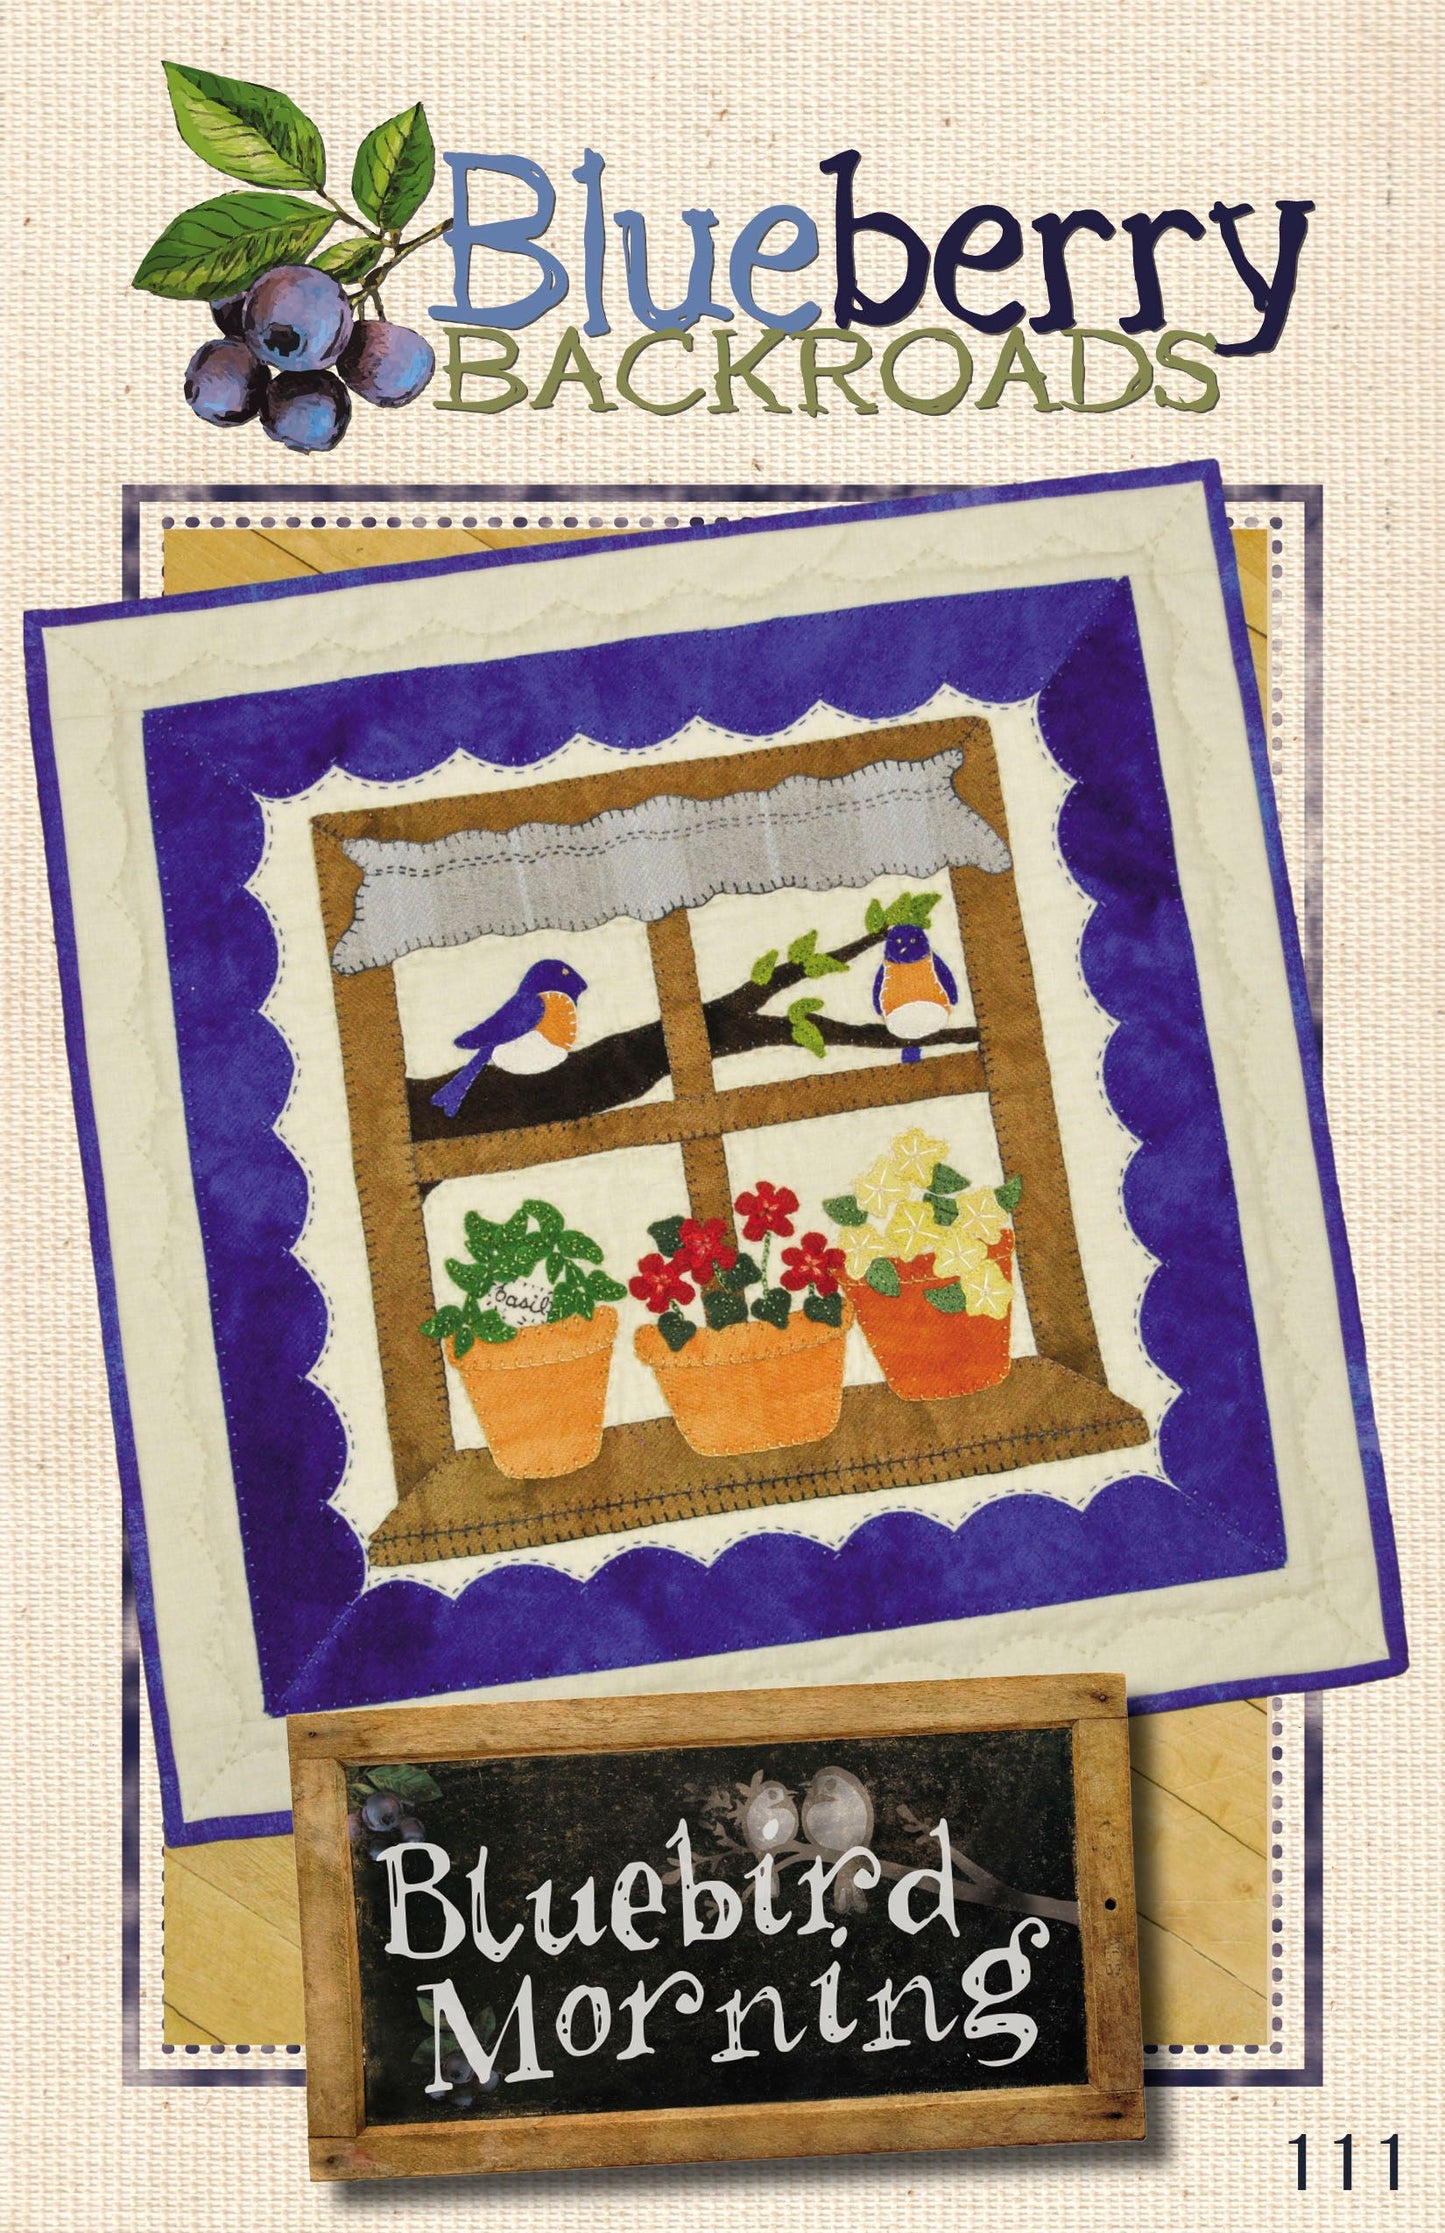 Blueberry Morning -Kits-Threads- Paper Patterns - Wool Applique